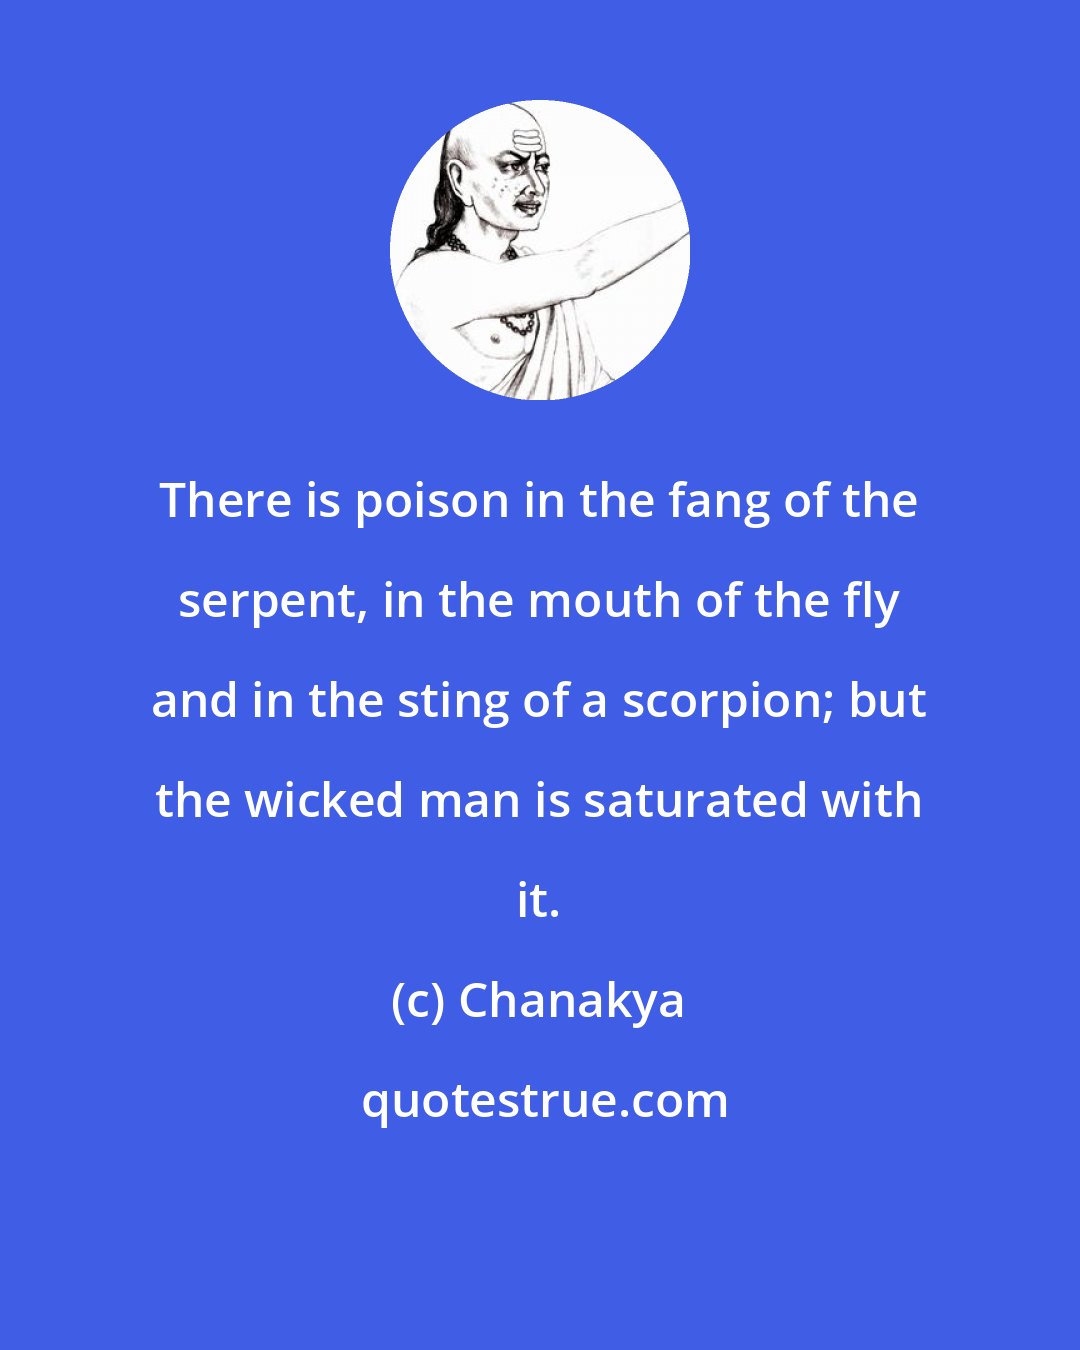 Chanakya: There is poison in the fang of the serpent, in the mouth of the fly and in the sting of a scorpion; but the wicked man is saturated with it.